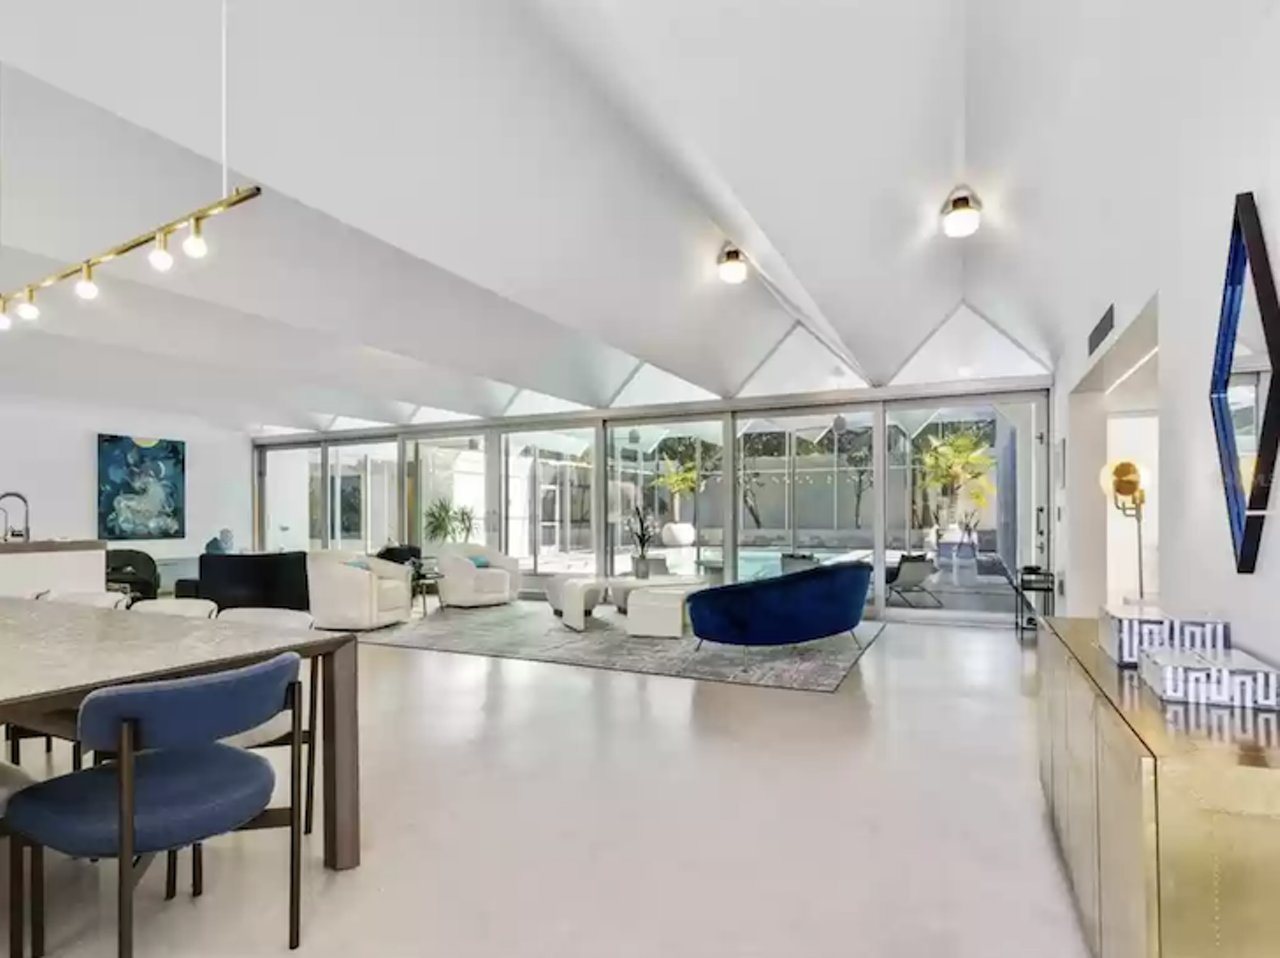 Sarasota’s iconic midcentury modern ‘ZigZag House’ is now for sale